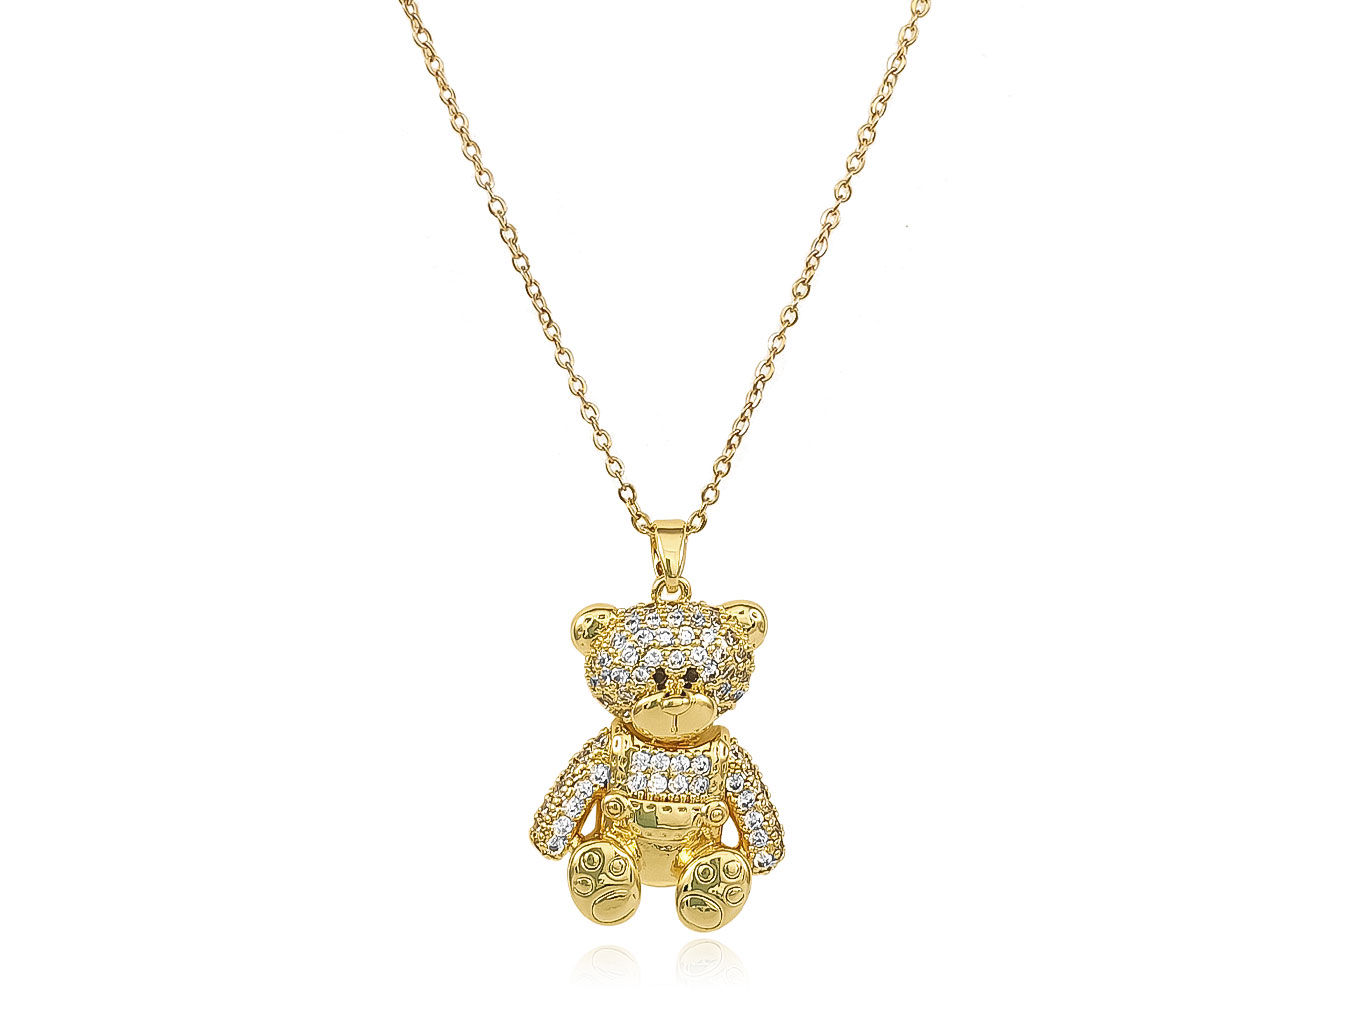 Silver Vermeil Teddy Bear necklace Pendant with Spinels | TOUS